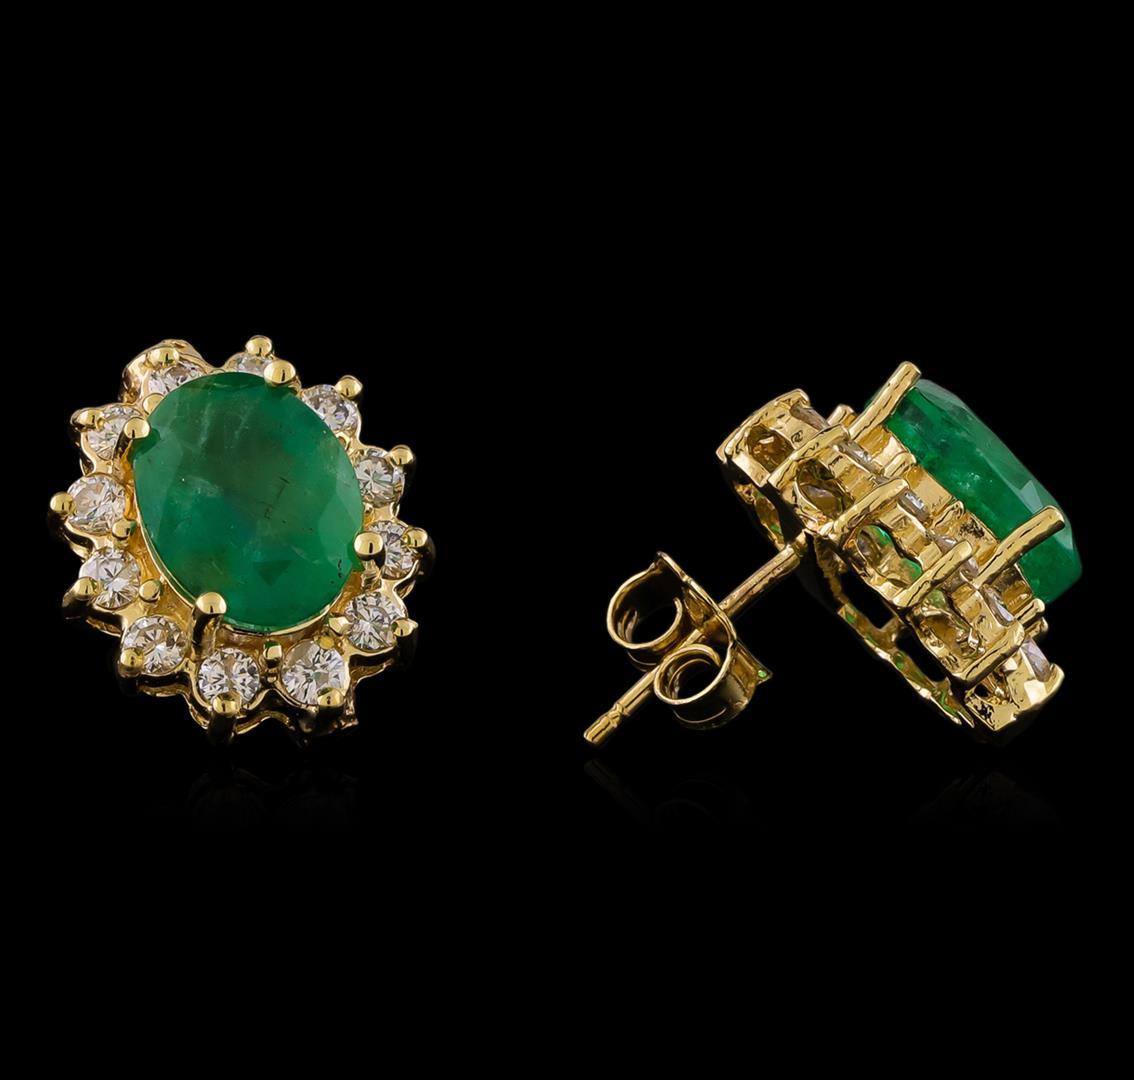 3.94 ctw Emerald and Diamond Earrings - 14KT Yellow Gold